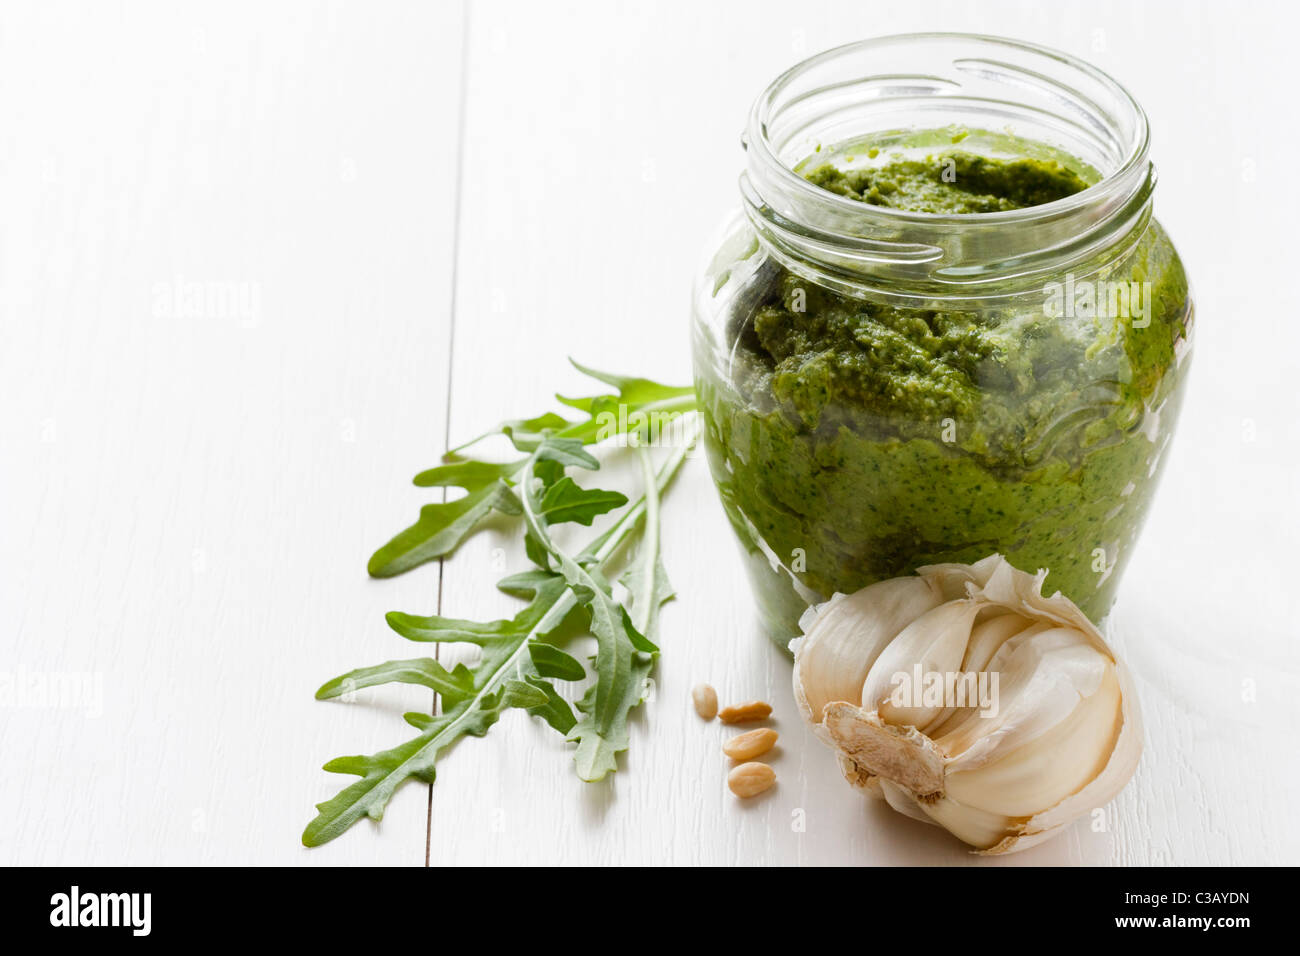 A glass of fresh prepared rocket pesto with garlic and pine nuts. Stock Photo